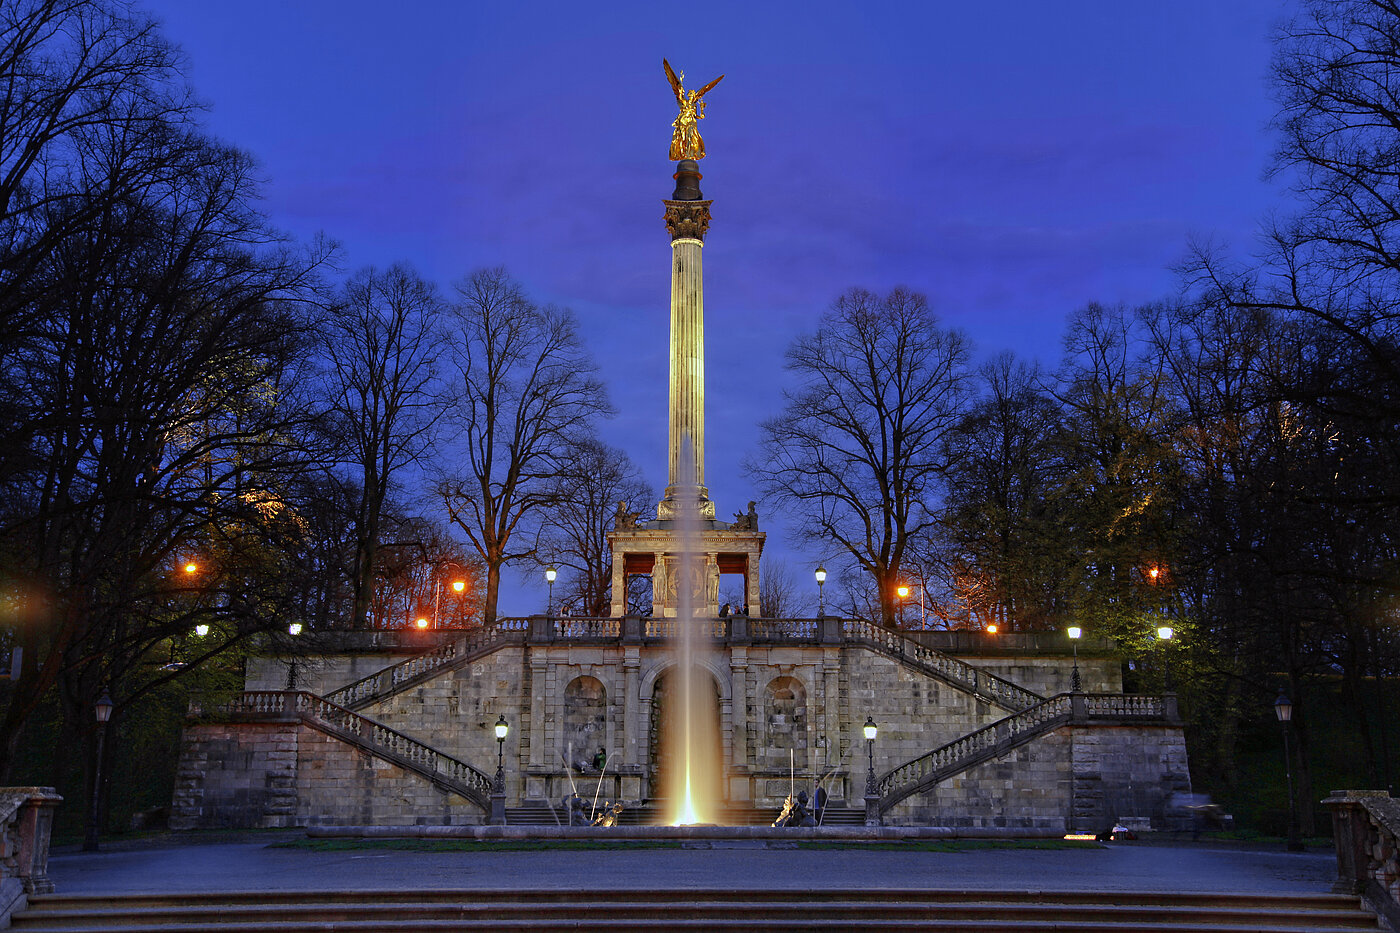 The photo shows the well-lit Angel of Peace by night